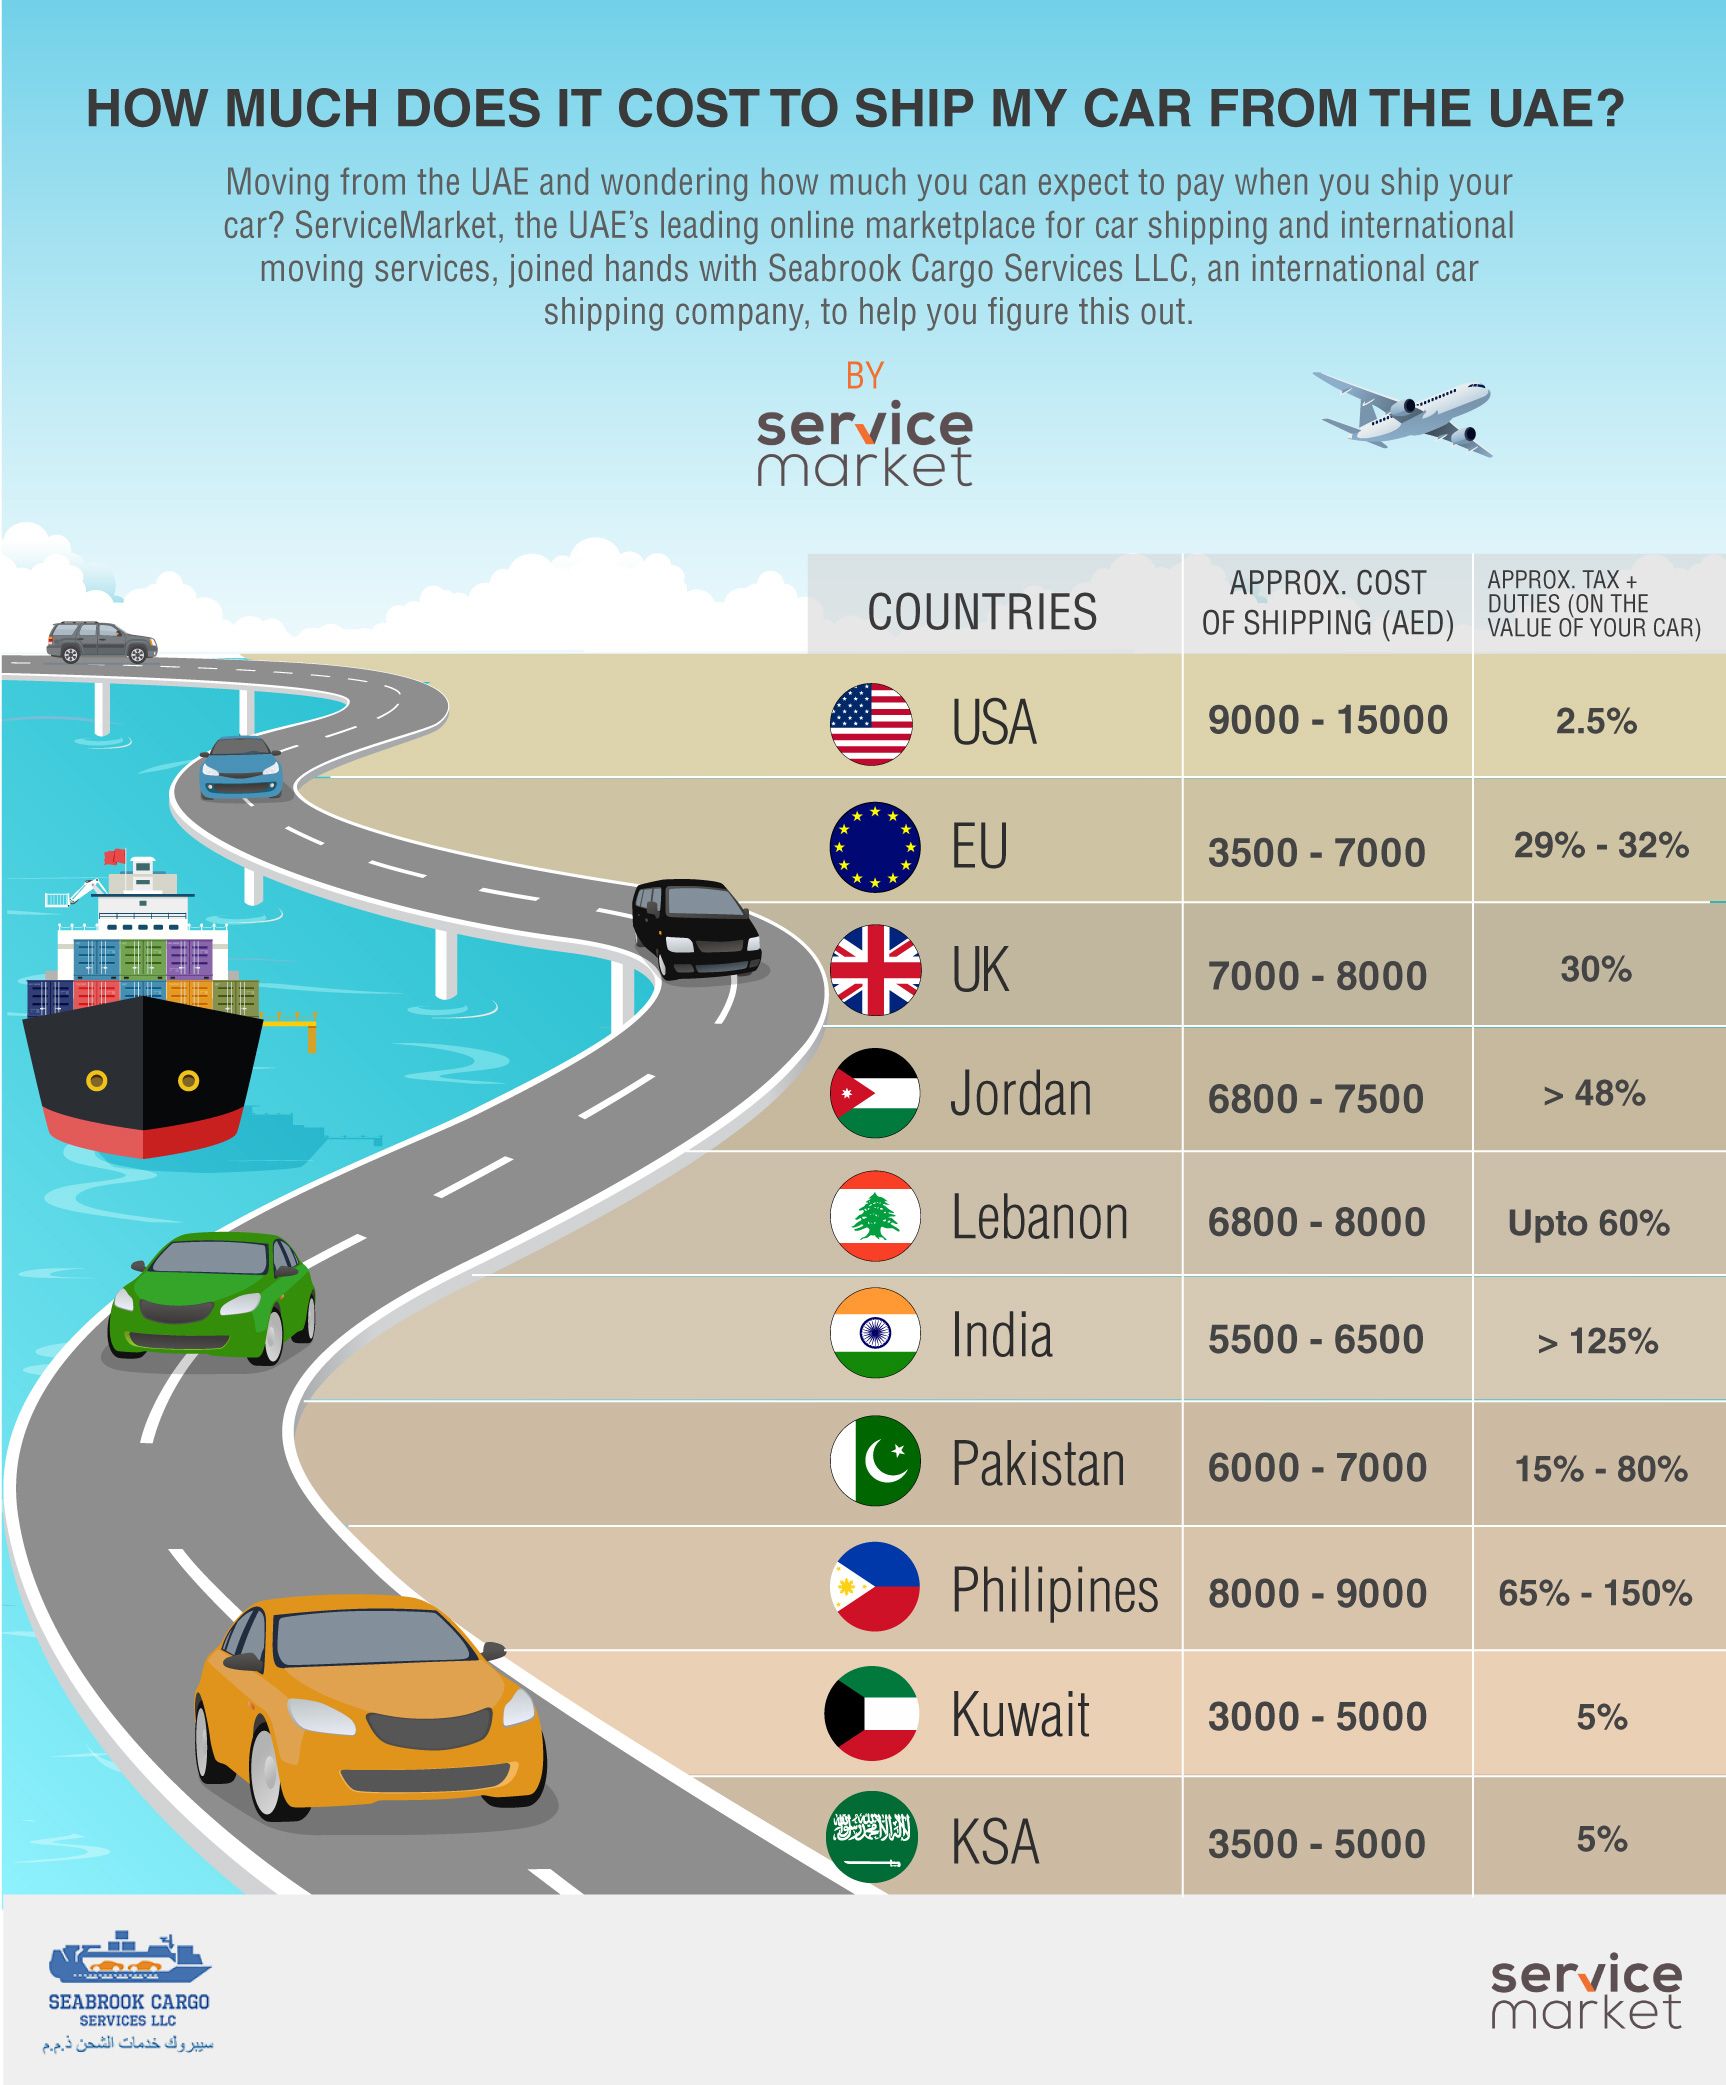 Cost to ship your car from the UAE